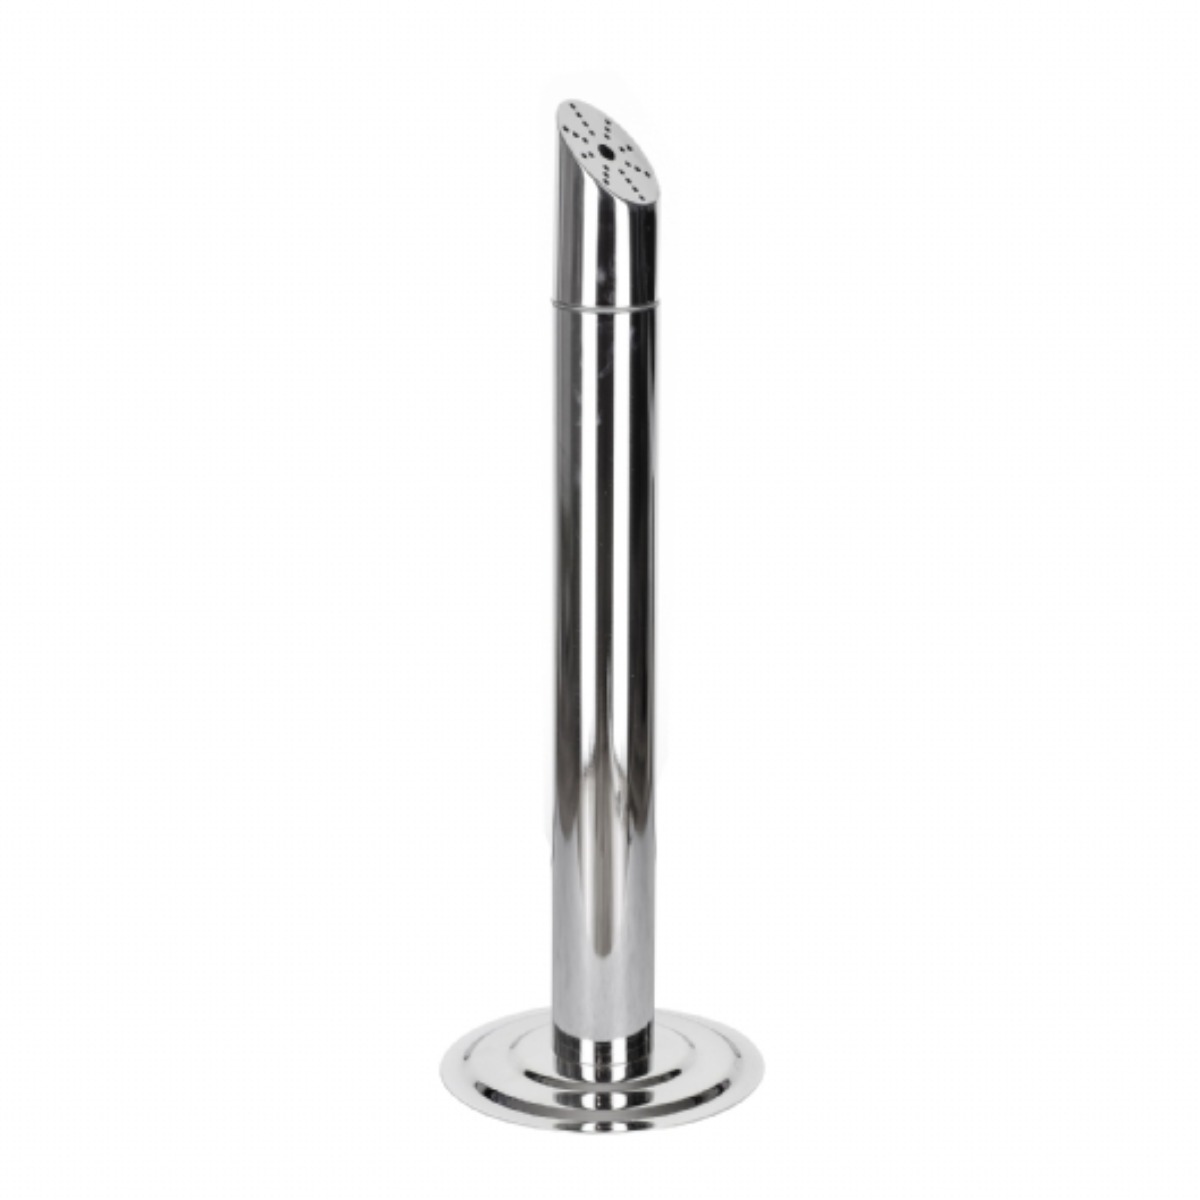 AB-101 Outdoor Ashtray Stainless product logo